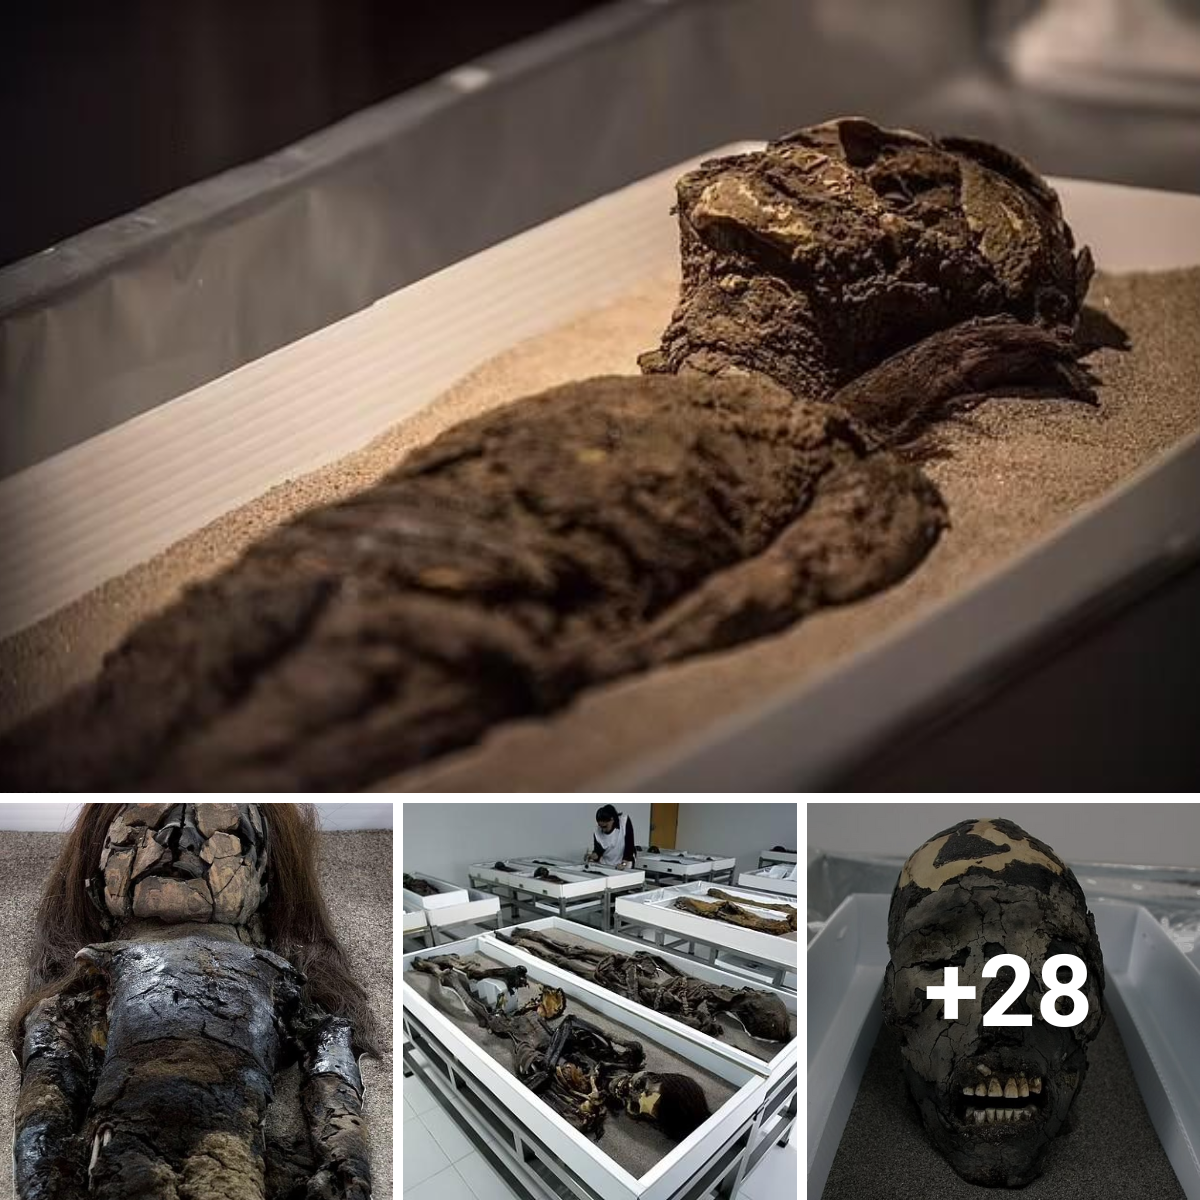 The oldest mystery mummy in the world is from Chile, and it’s on the UNESCO World Heritage List.